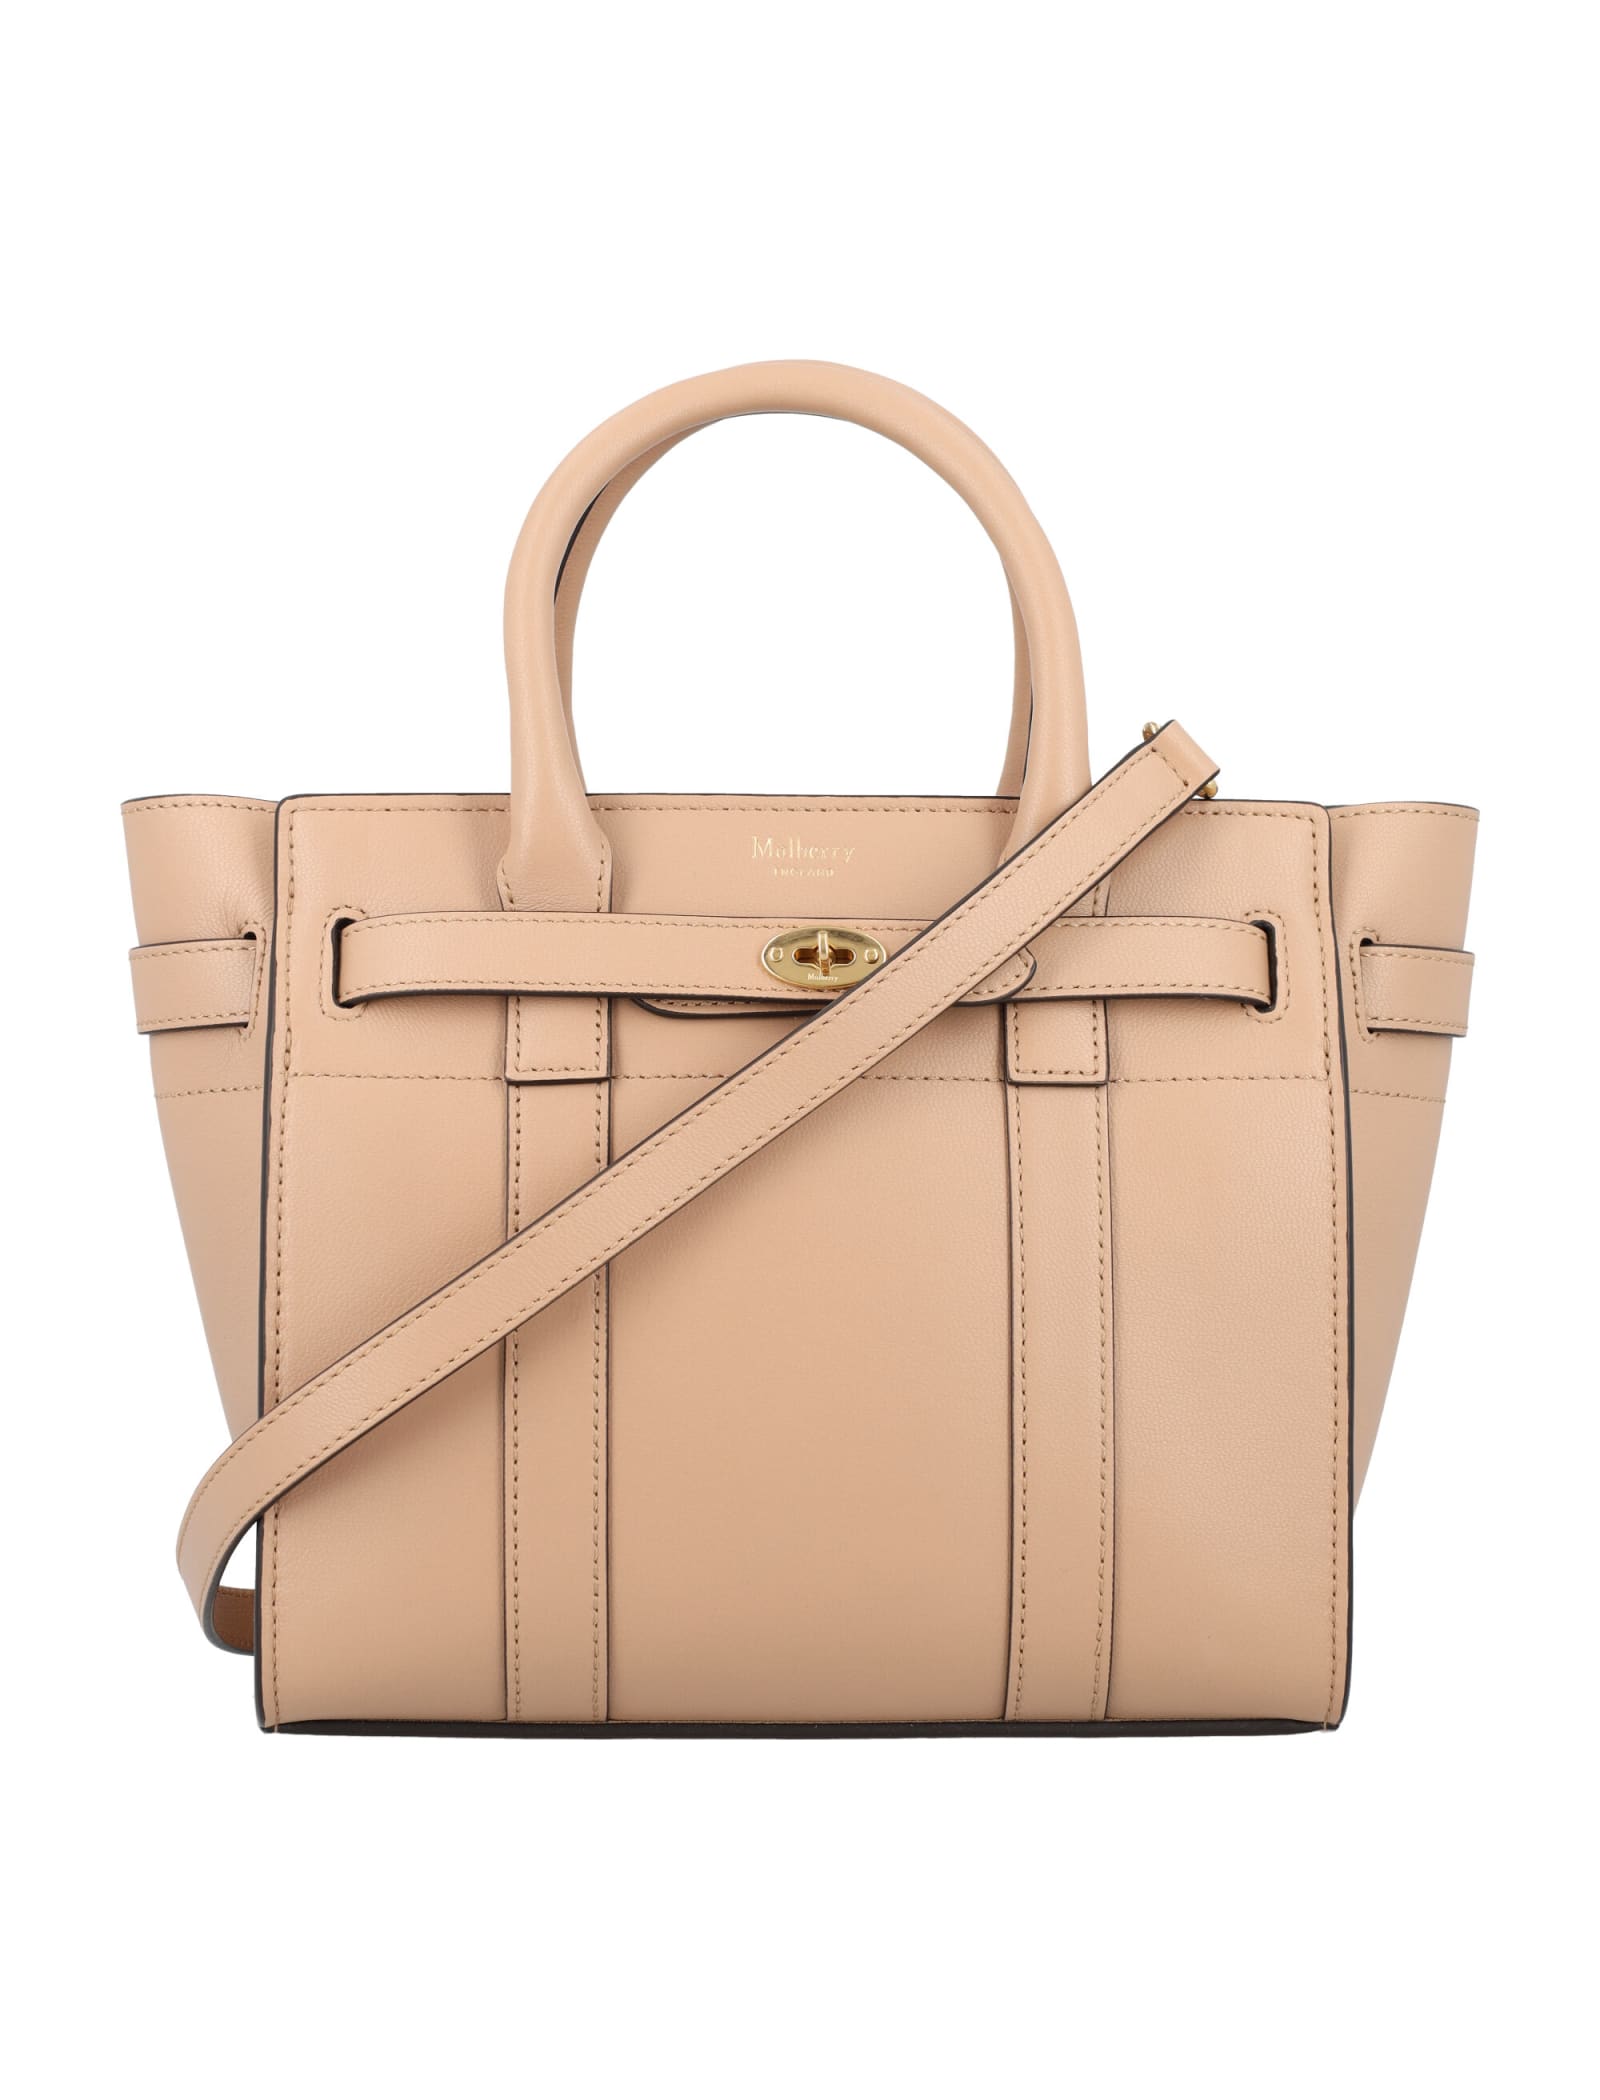 Mulberry Mini Zipped Bayswater Bag In Maple